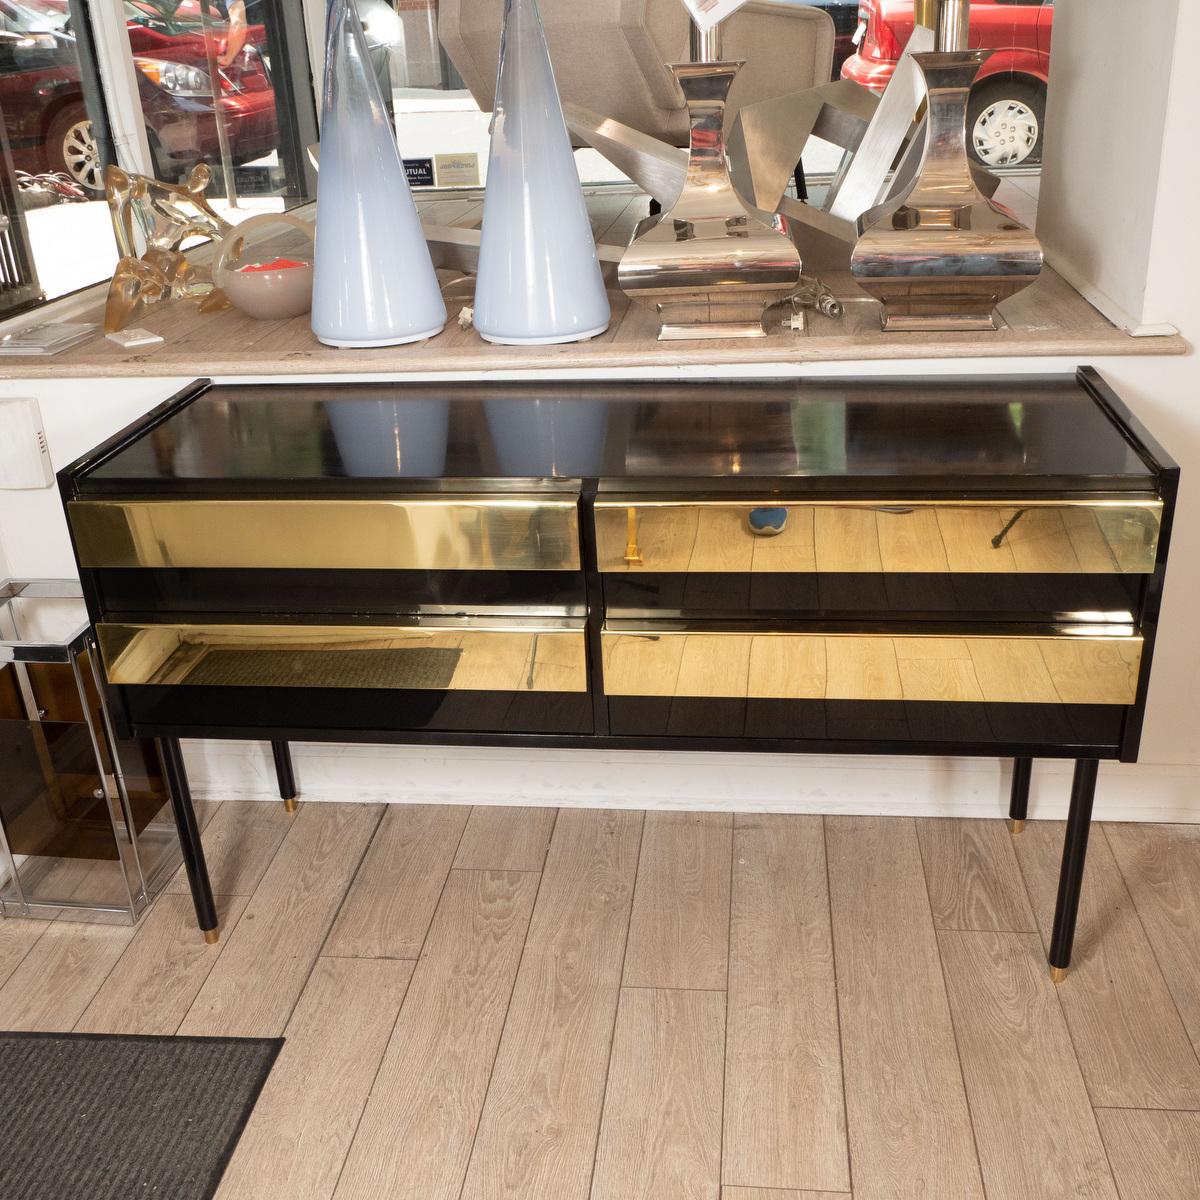 Lacquered wood sideboard with large brass front pulls.